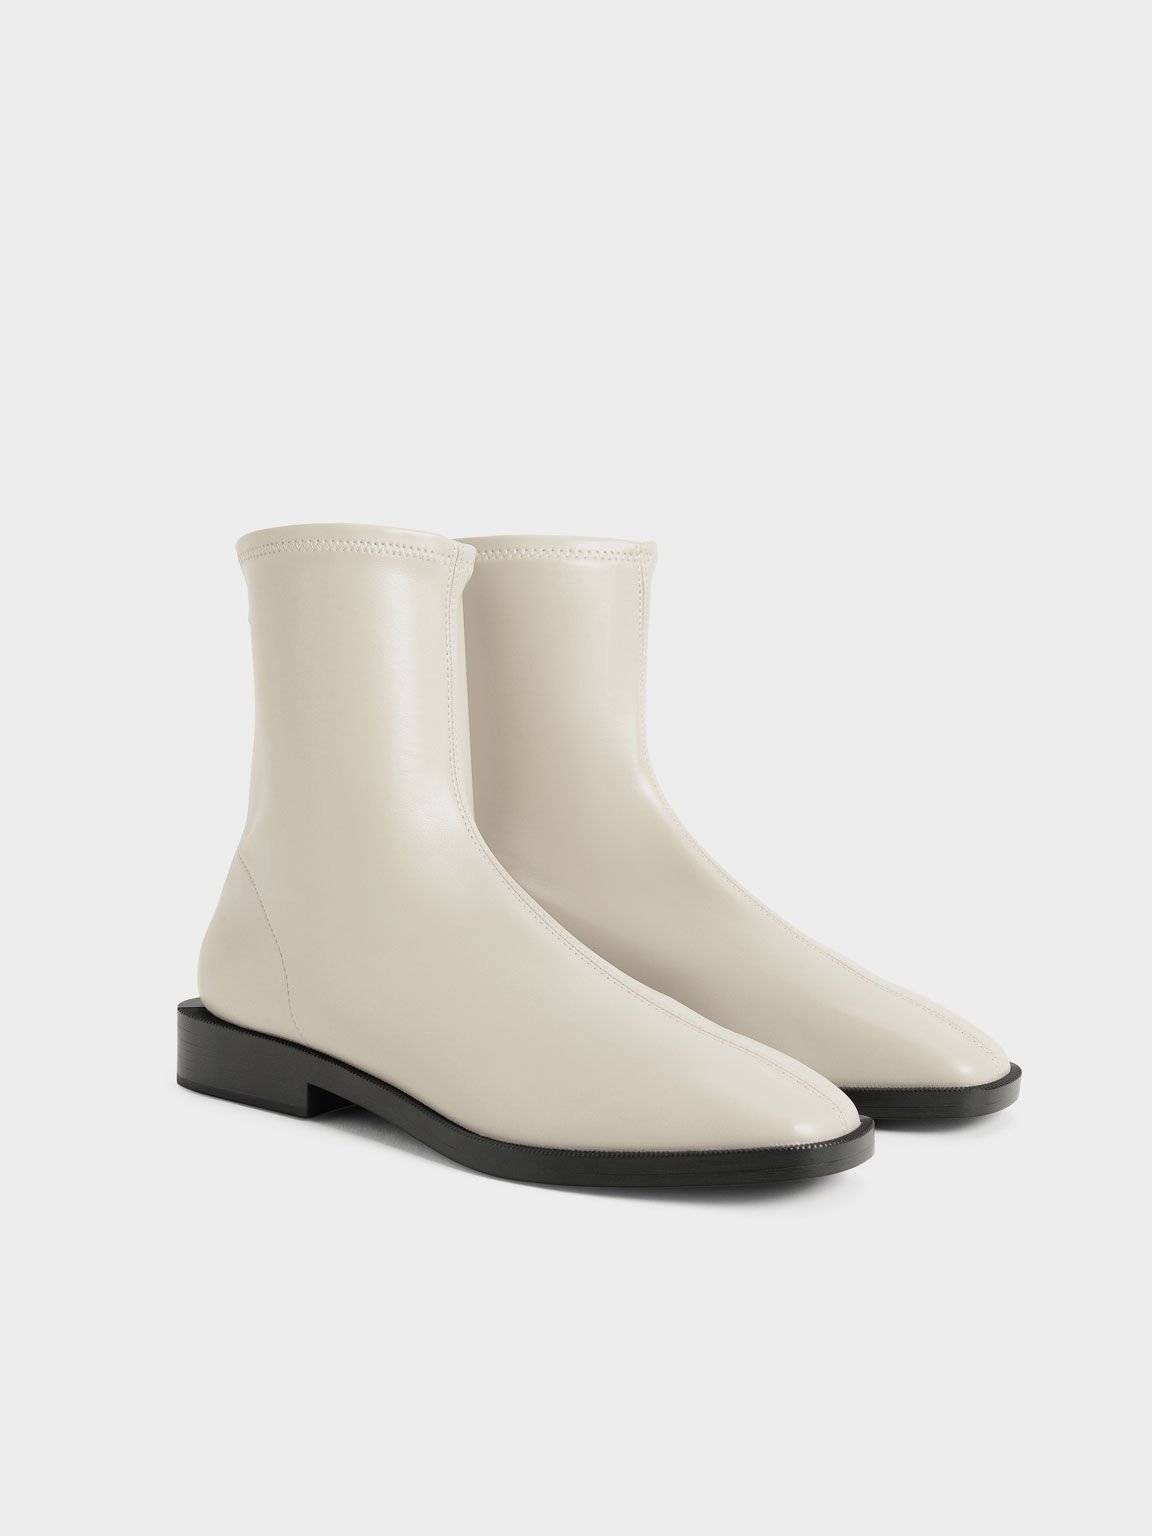 Square Toe Zip-Up Ankle Boots, Blanco tiza, hi-res